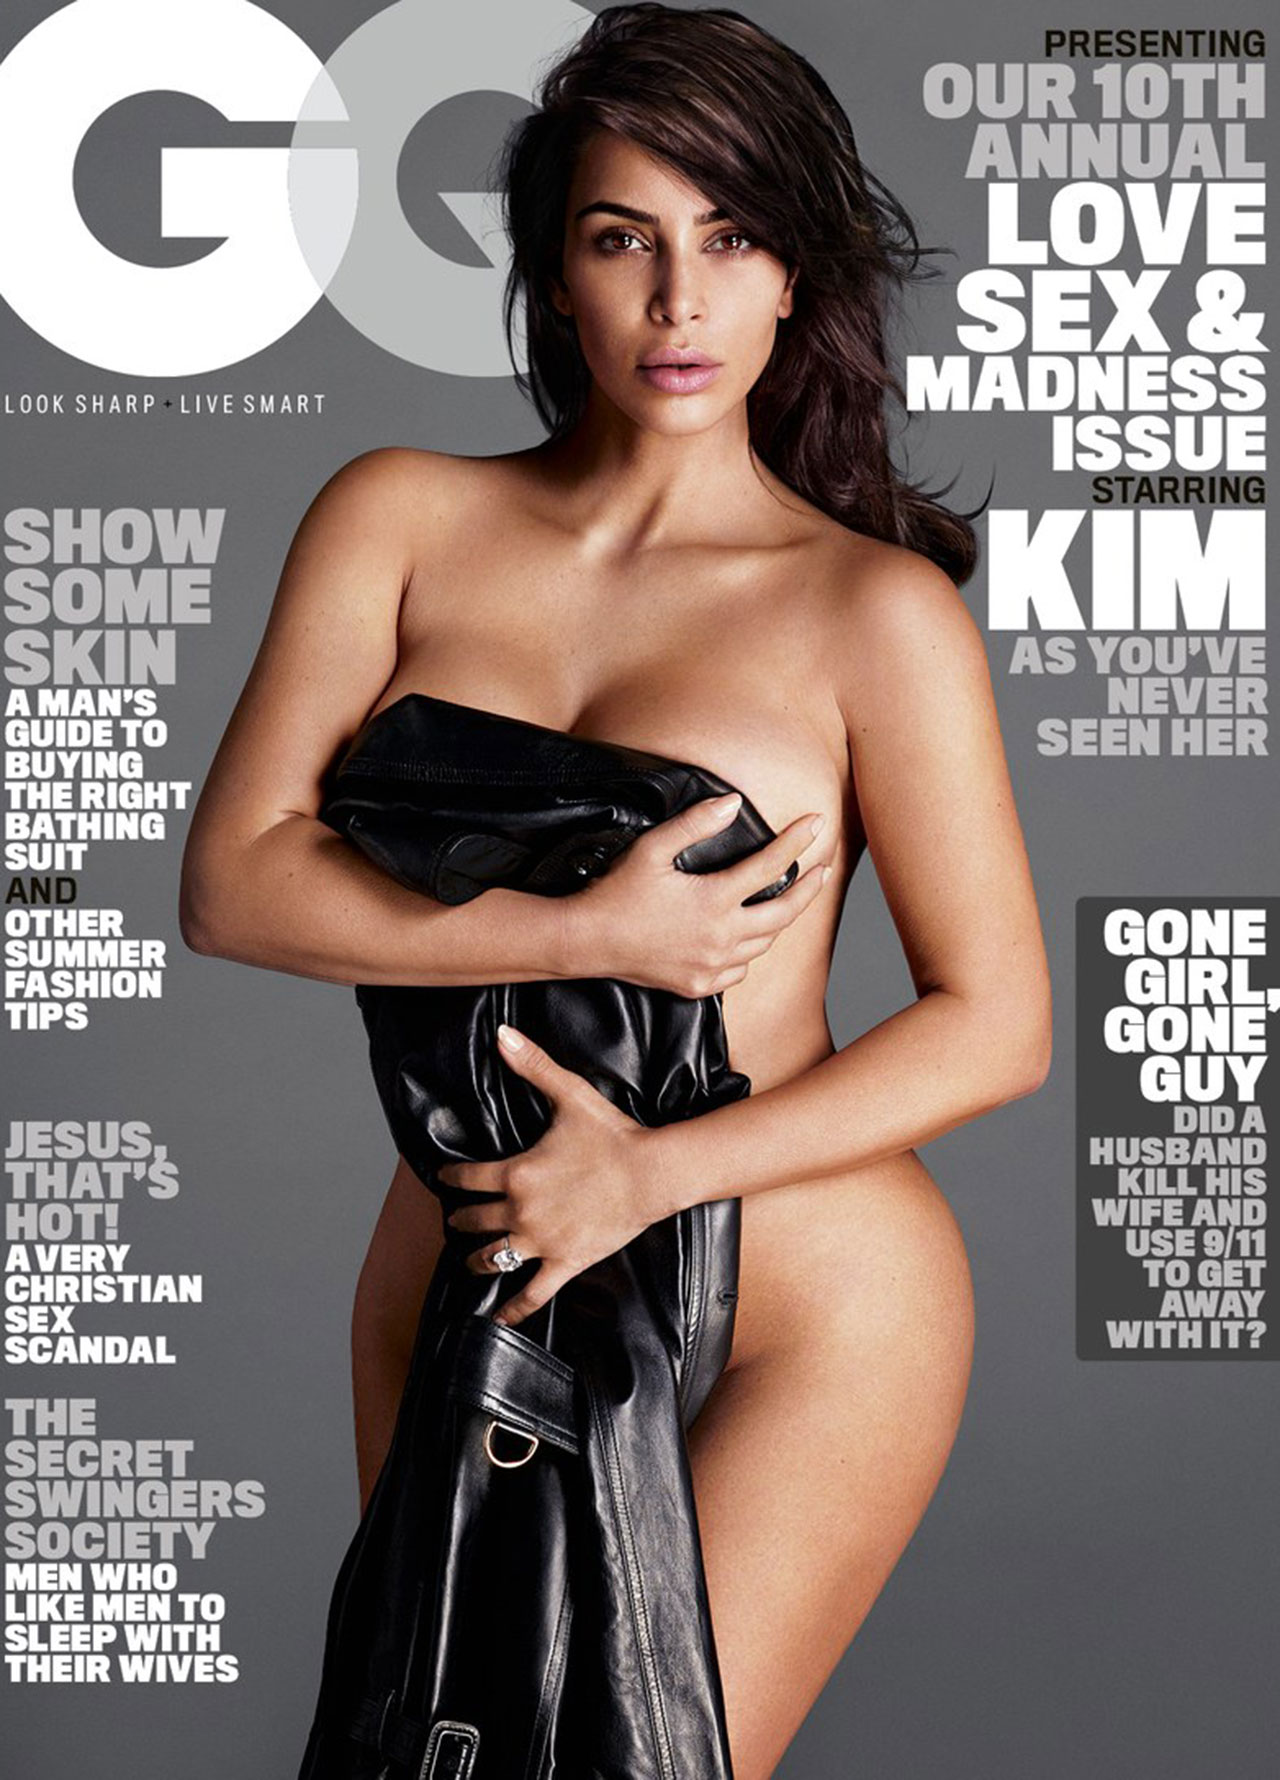 Kim Kardashian has another try at breaking the internet on the cover of US GQ image